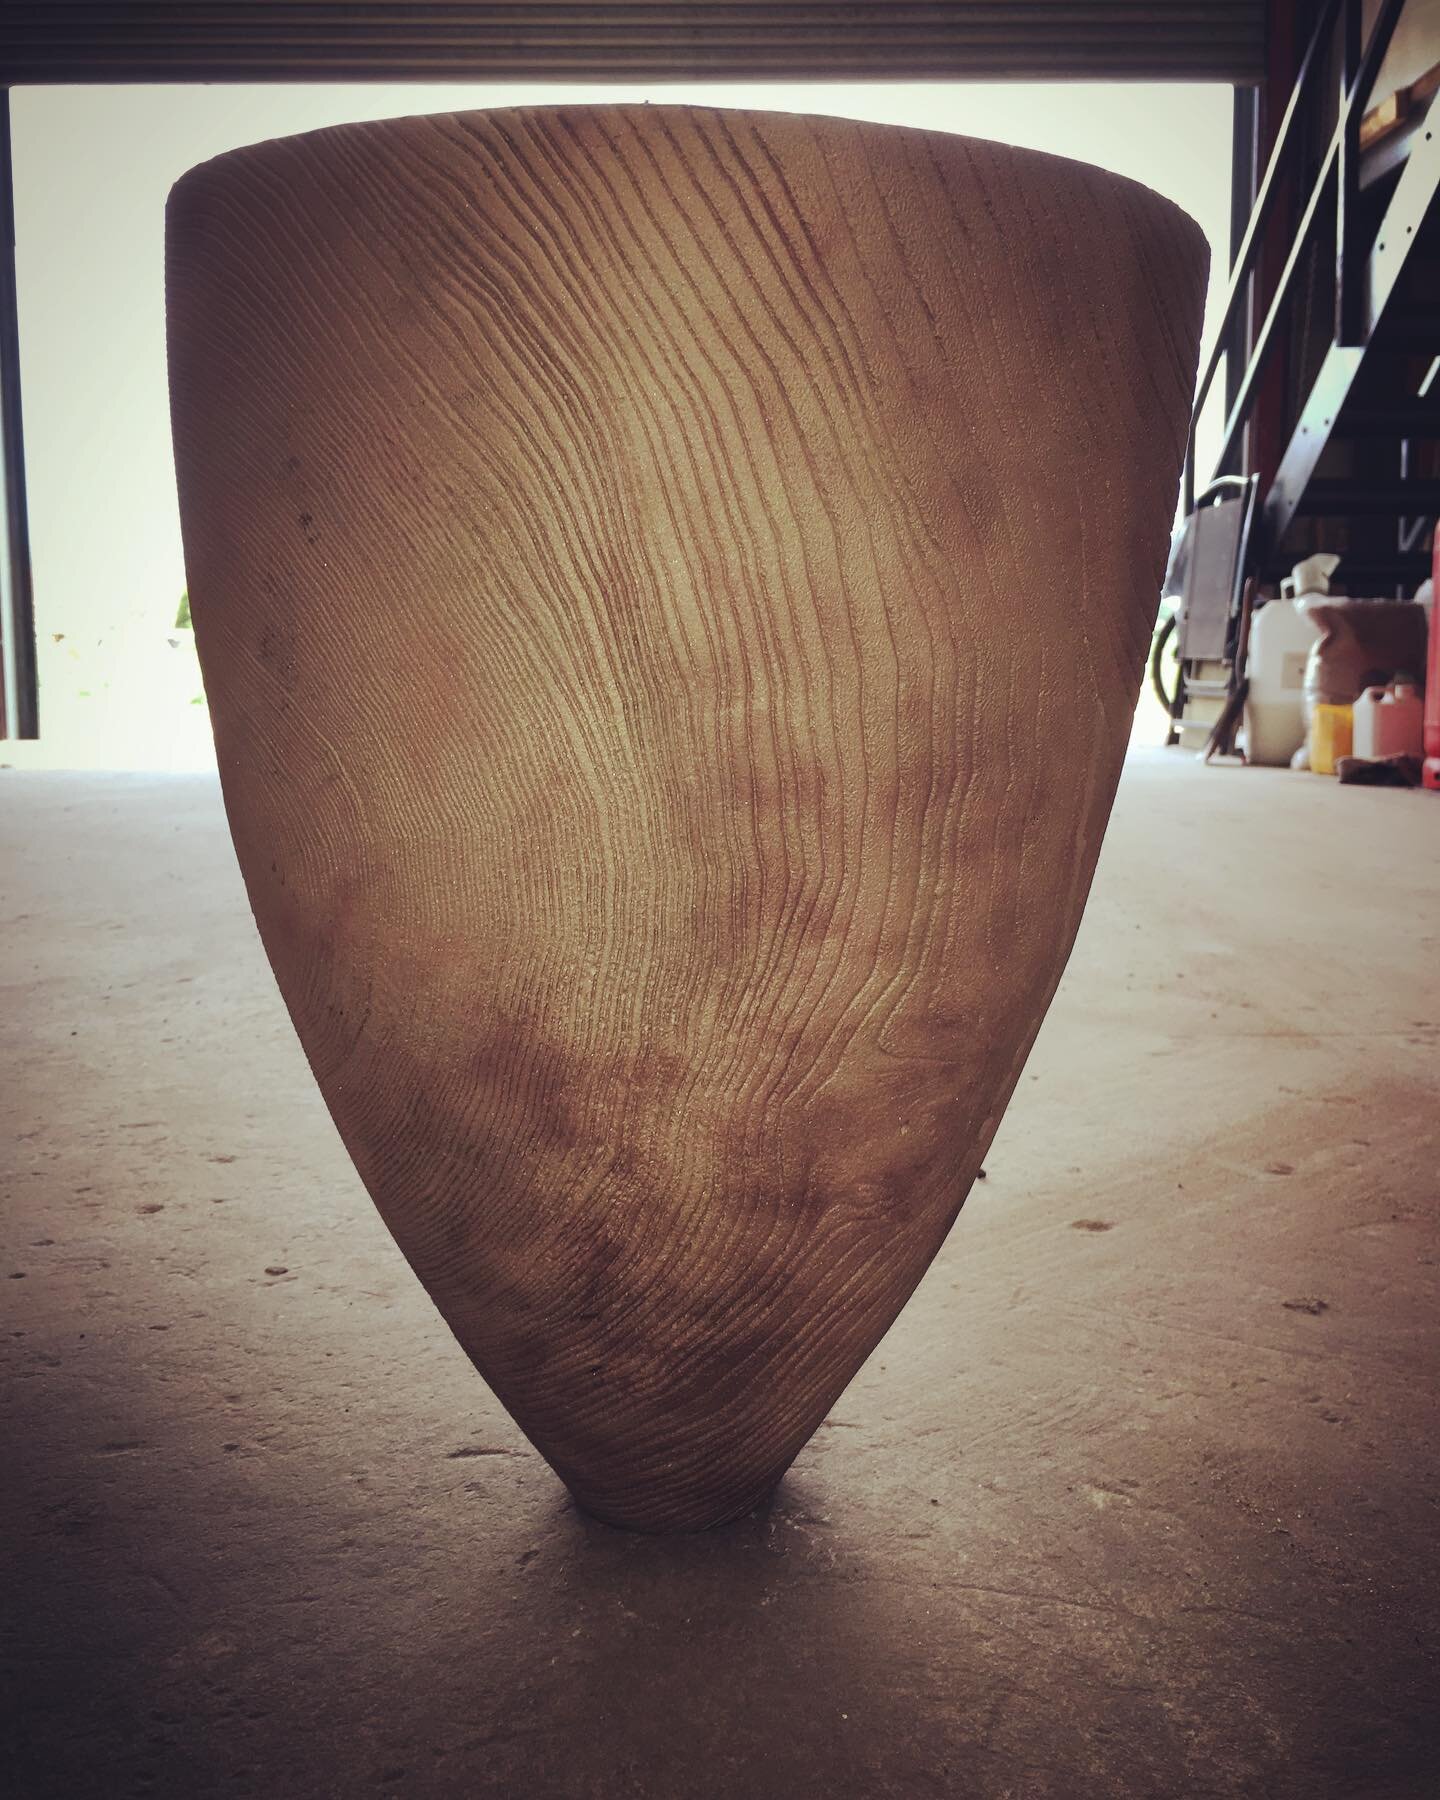 Large turned wood form by Alex De Vol (@woodwoven ) recreated in bronze.
.
The video shows Dina chasing and fettling the surface. This process removes any imperfections which occur in the casting process. It took her 8 hrs to complete this work, afte